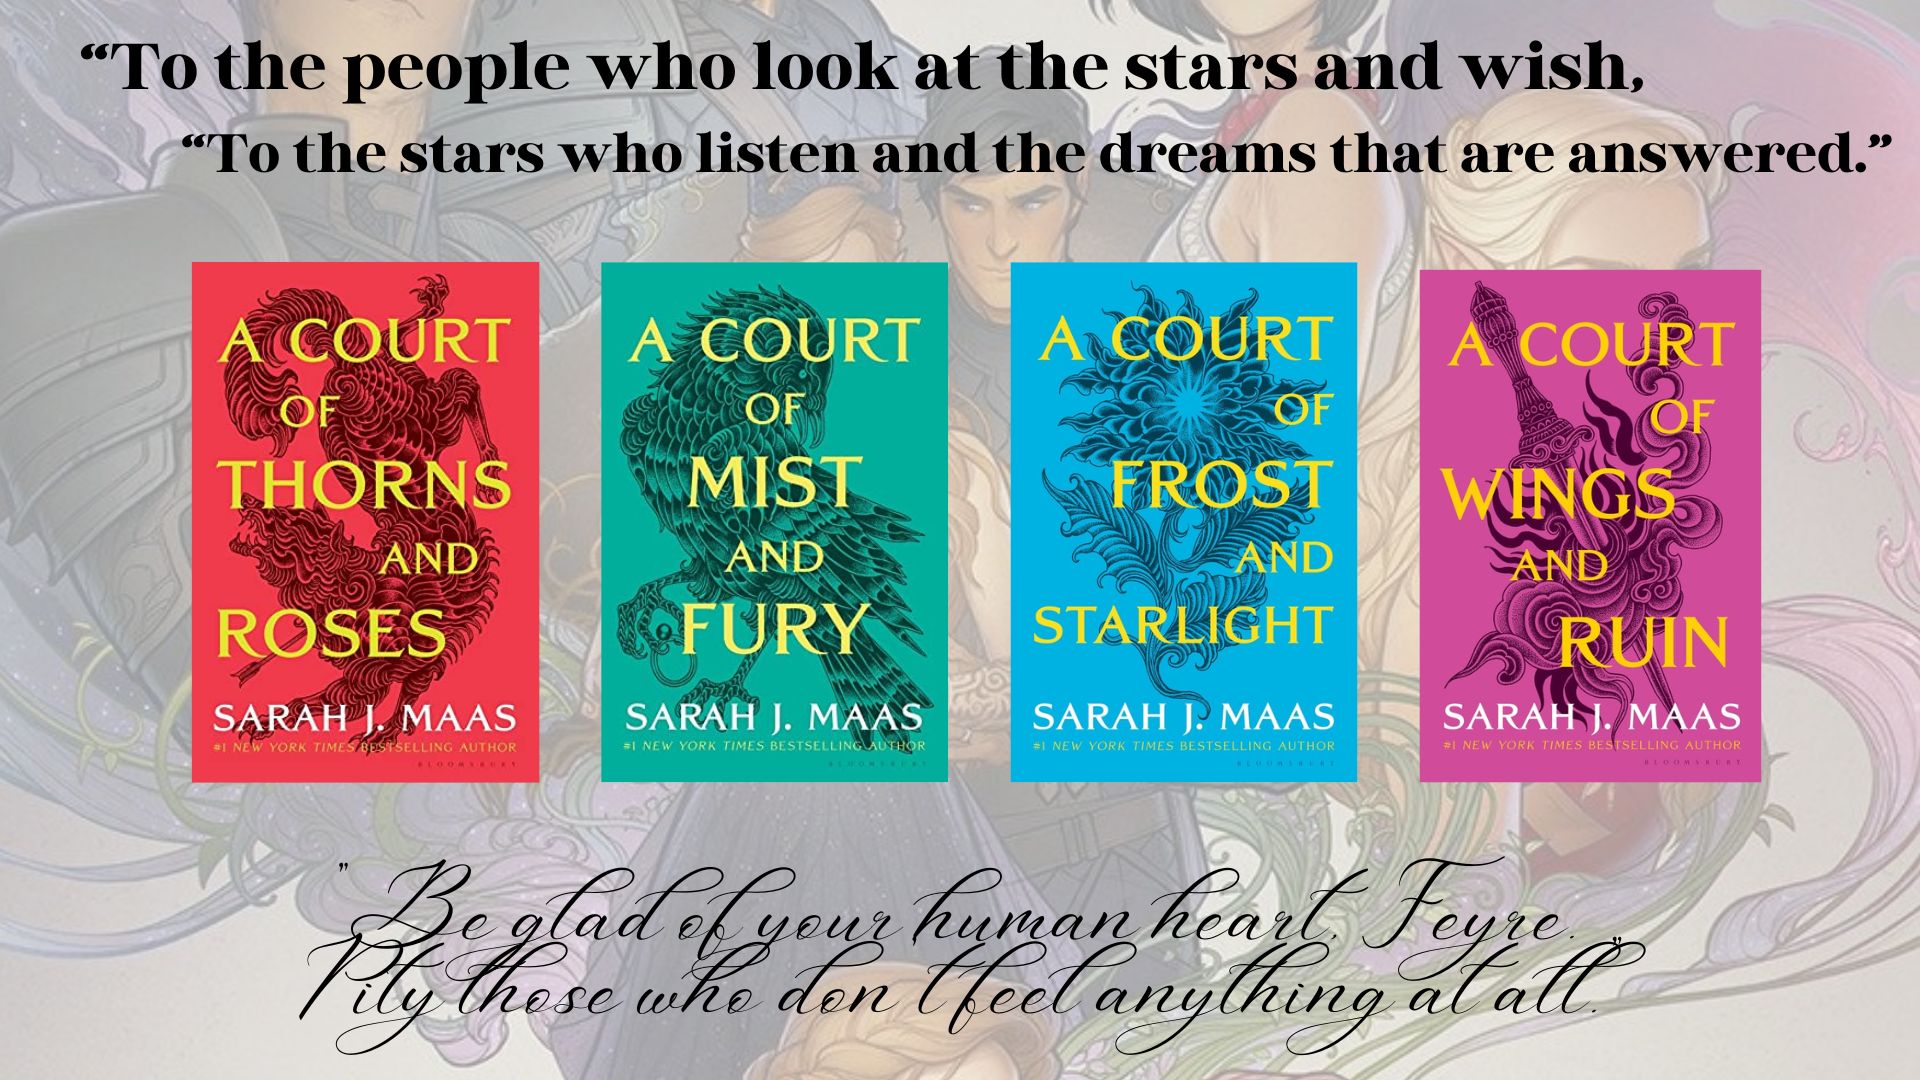 How To Read A Court Of Thorns And Roses [ACOTAR] Books In Order